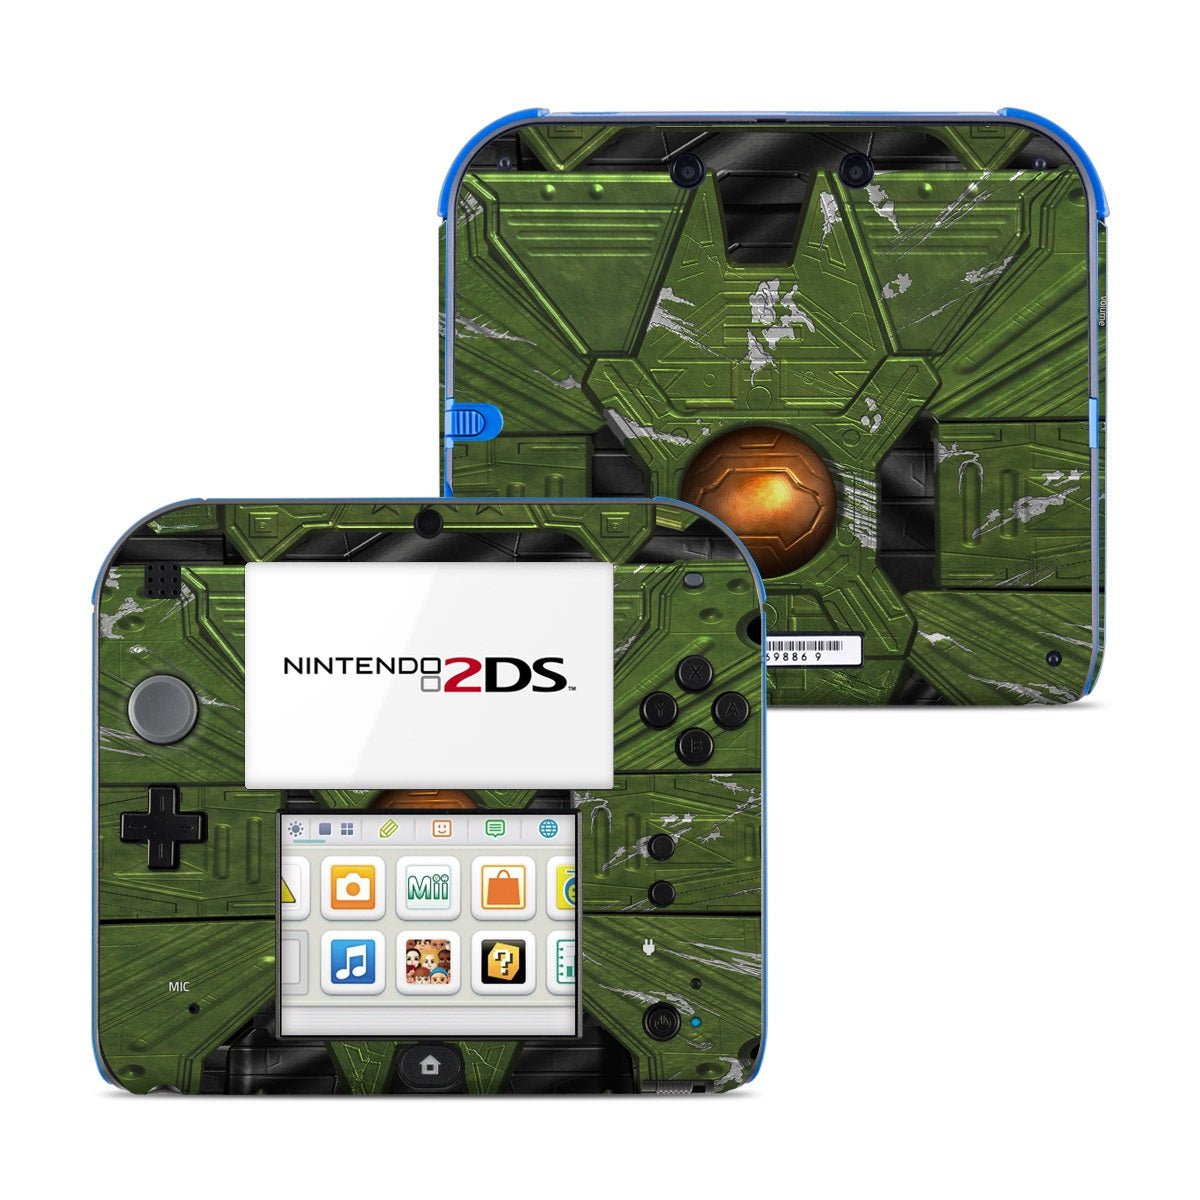 Hail To The Chief - Nintendo 2DS Skin